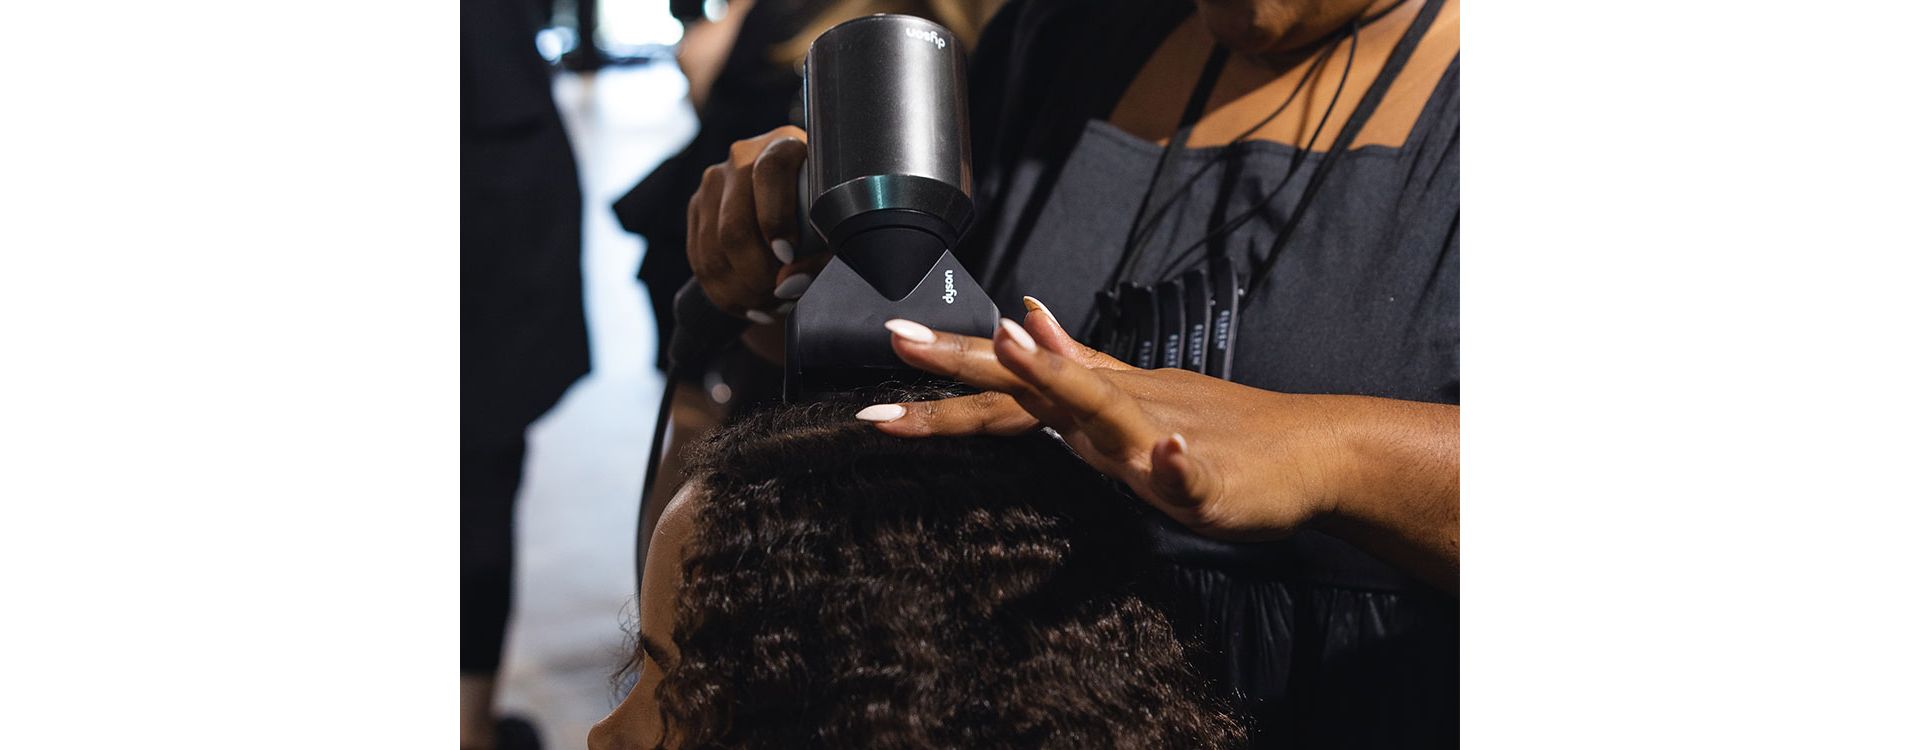 Dyson supersonic being used on models hair